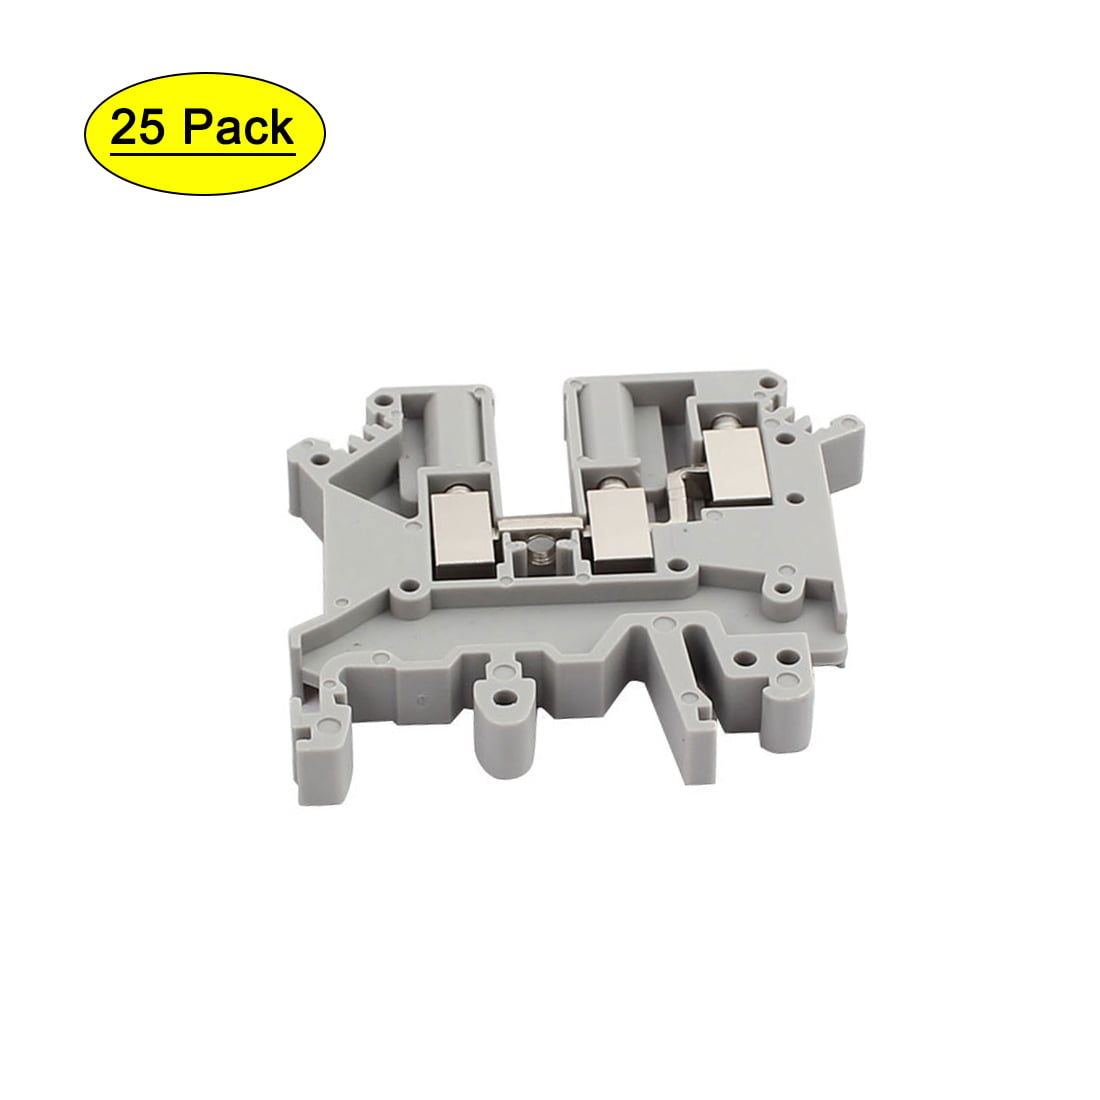 uxcell 10Pcs MBKKB2.5 DIN Rail Mount Double-Level Terminal Block 500V 2.5mm2 Cable Gray